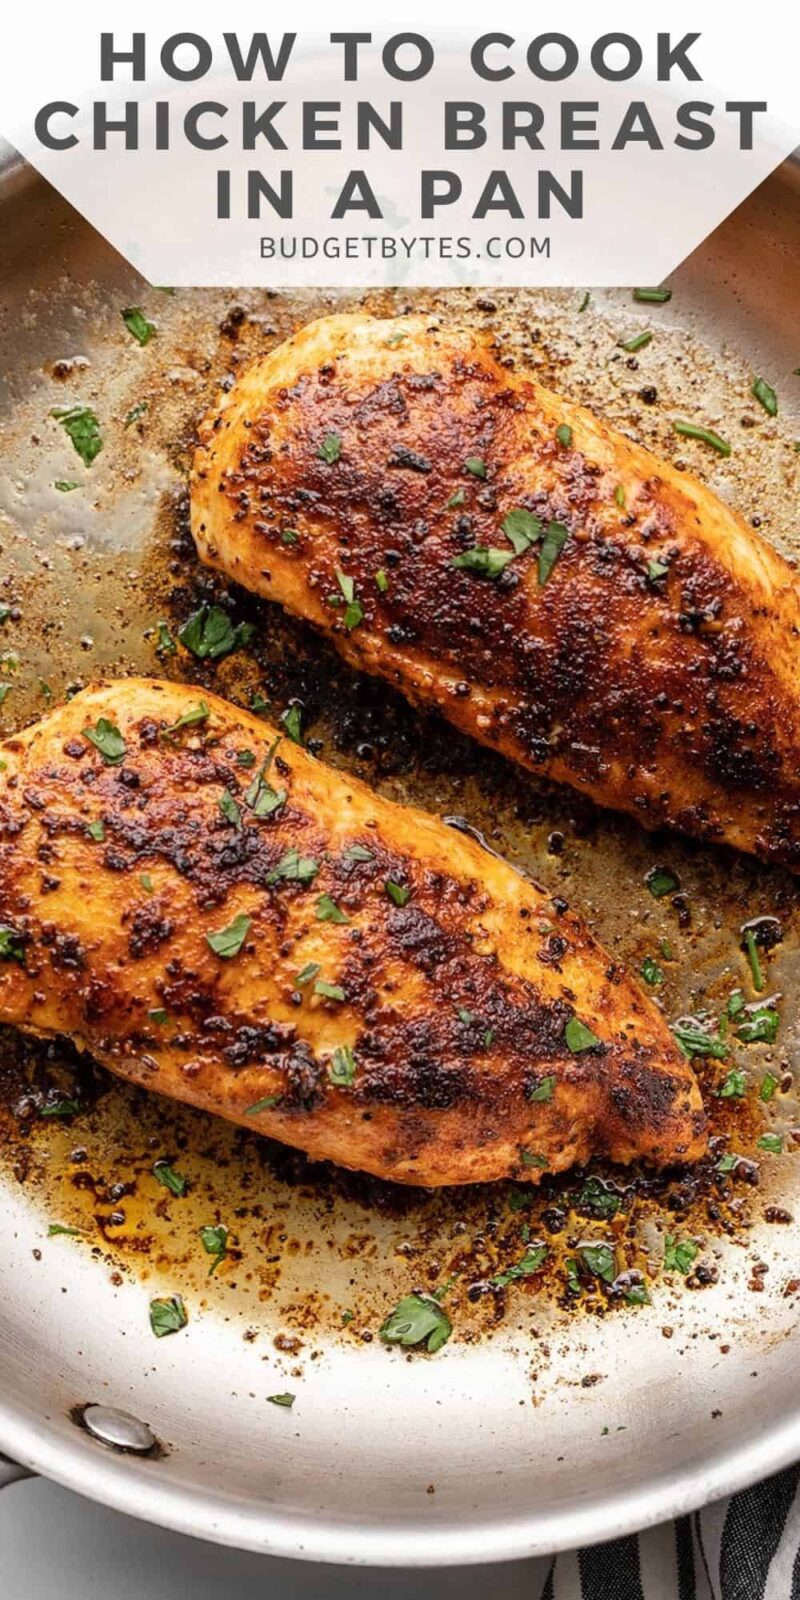 https://www.budgetbytes.com/wp-content/uploads/2021/12/How-to-Cook-Chicken-Breast-in-a-Pan-PIN1-800x1600.jpg